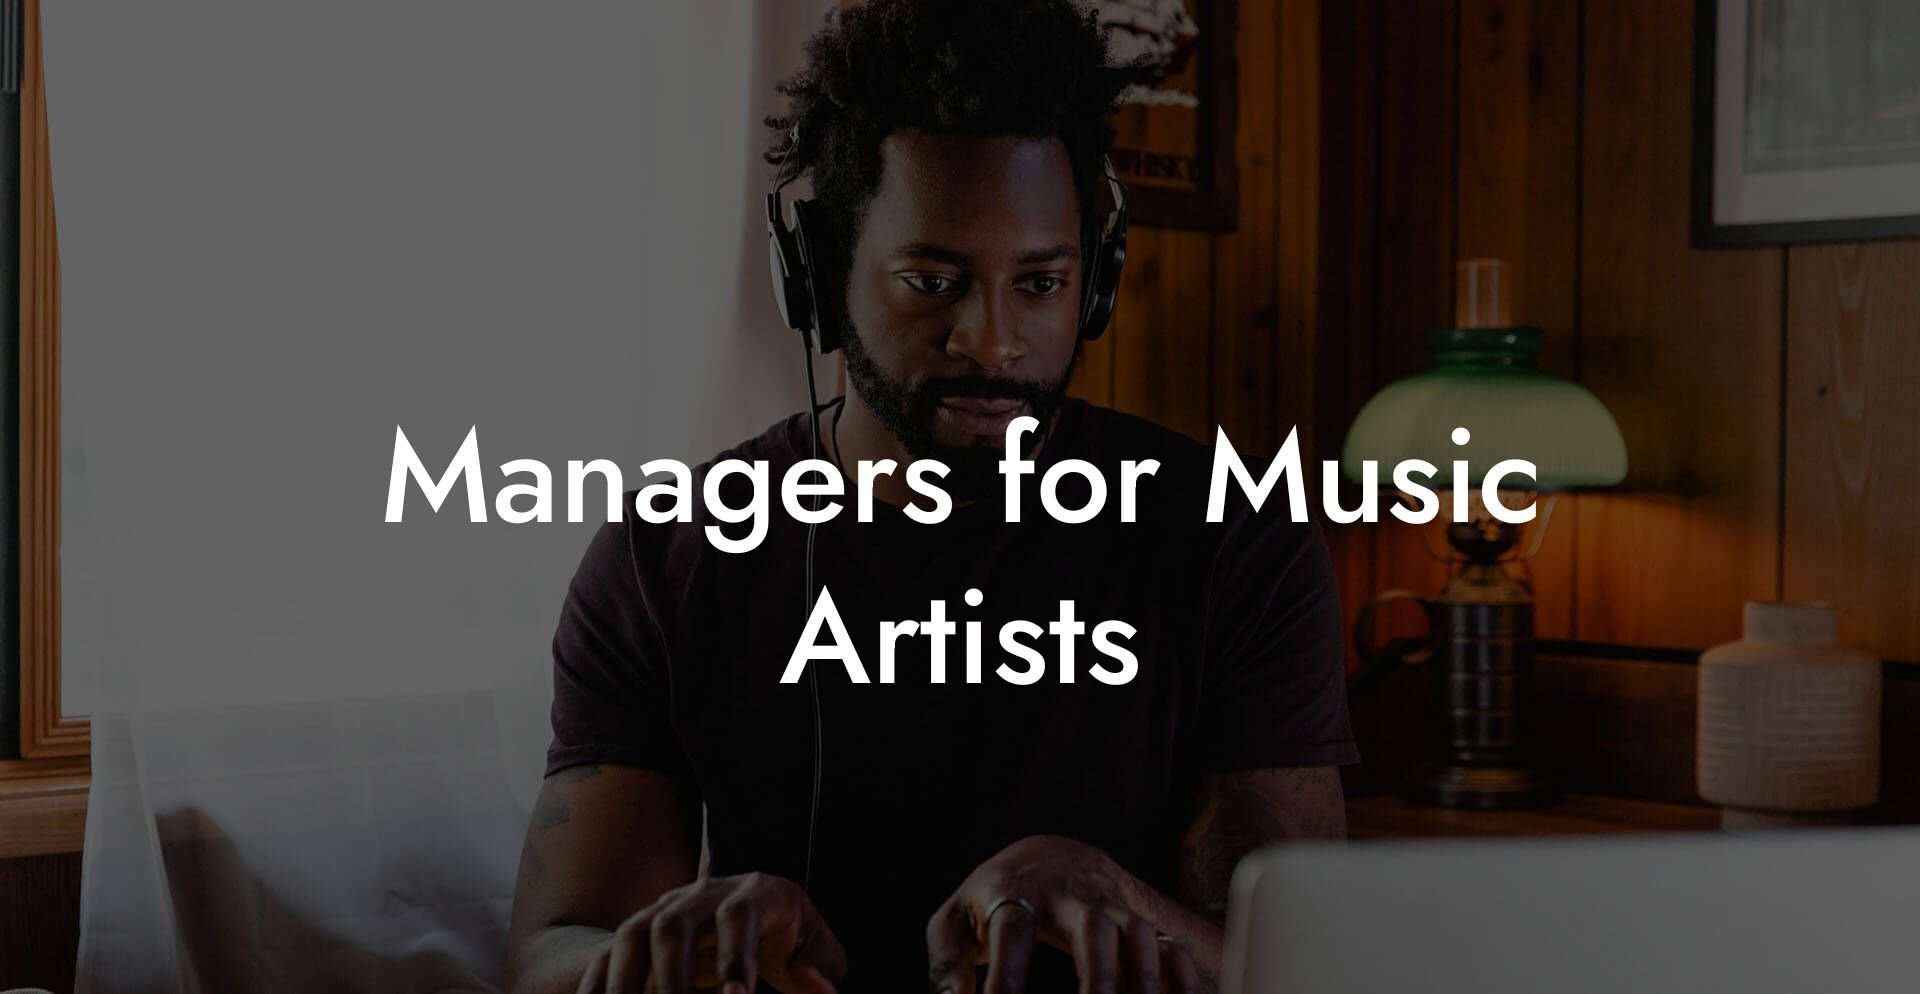 Managers for Music Artists